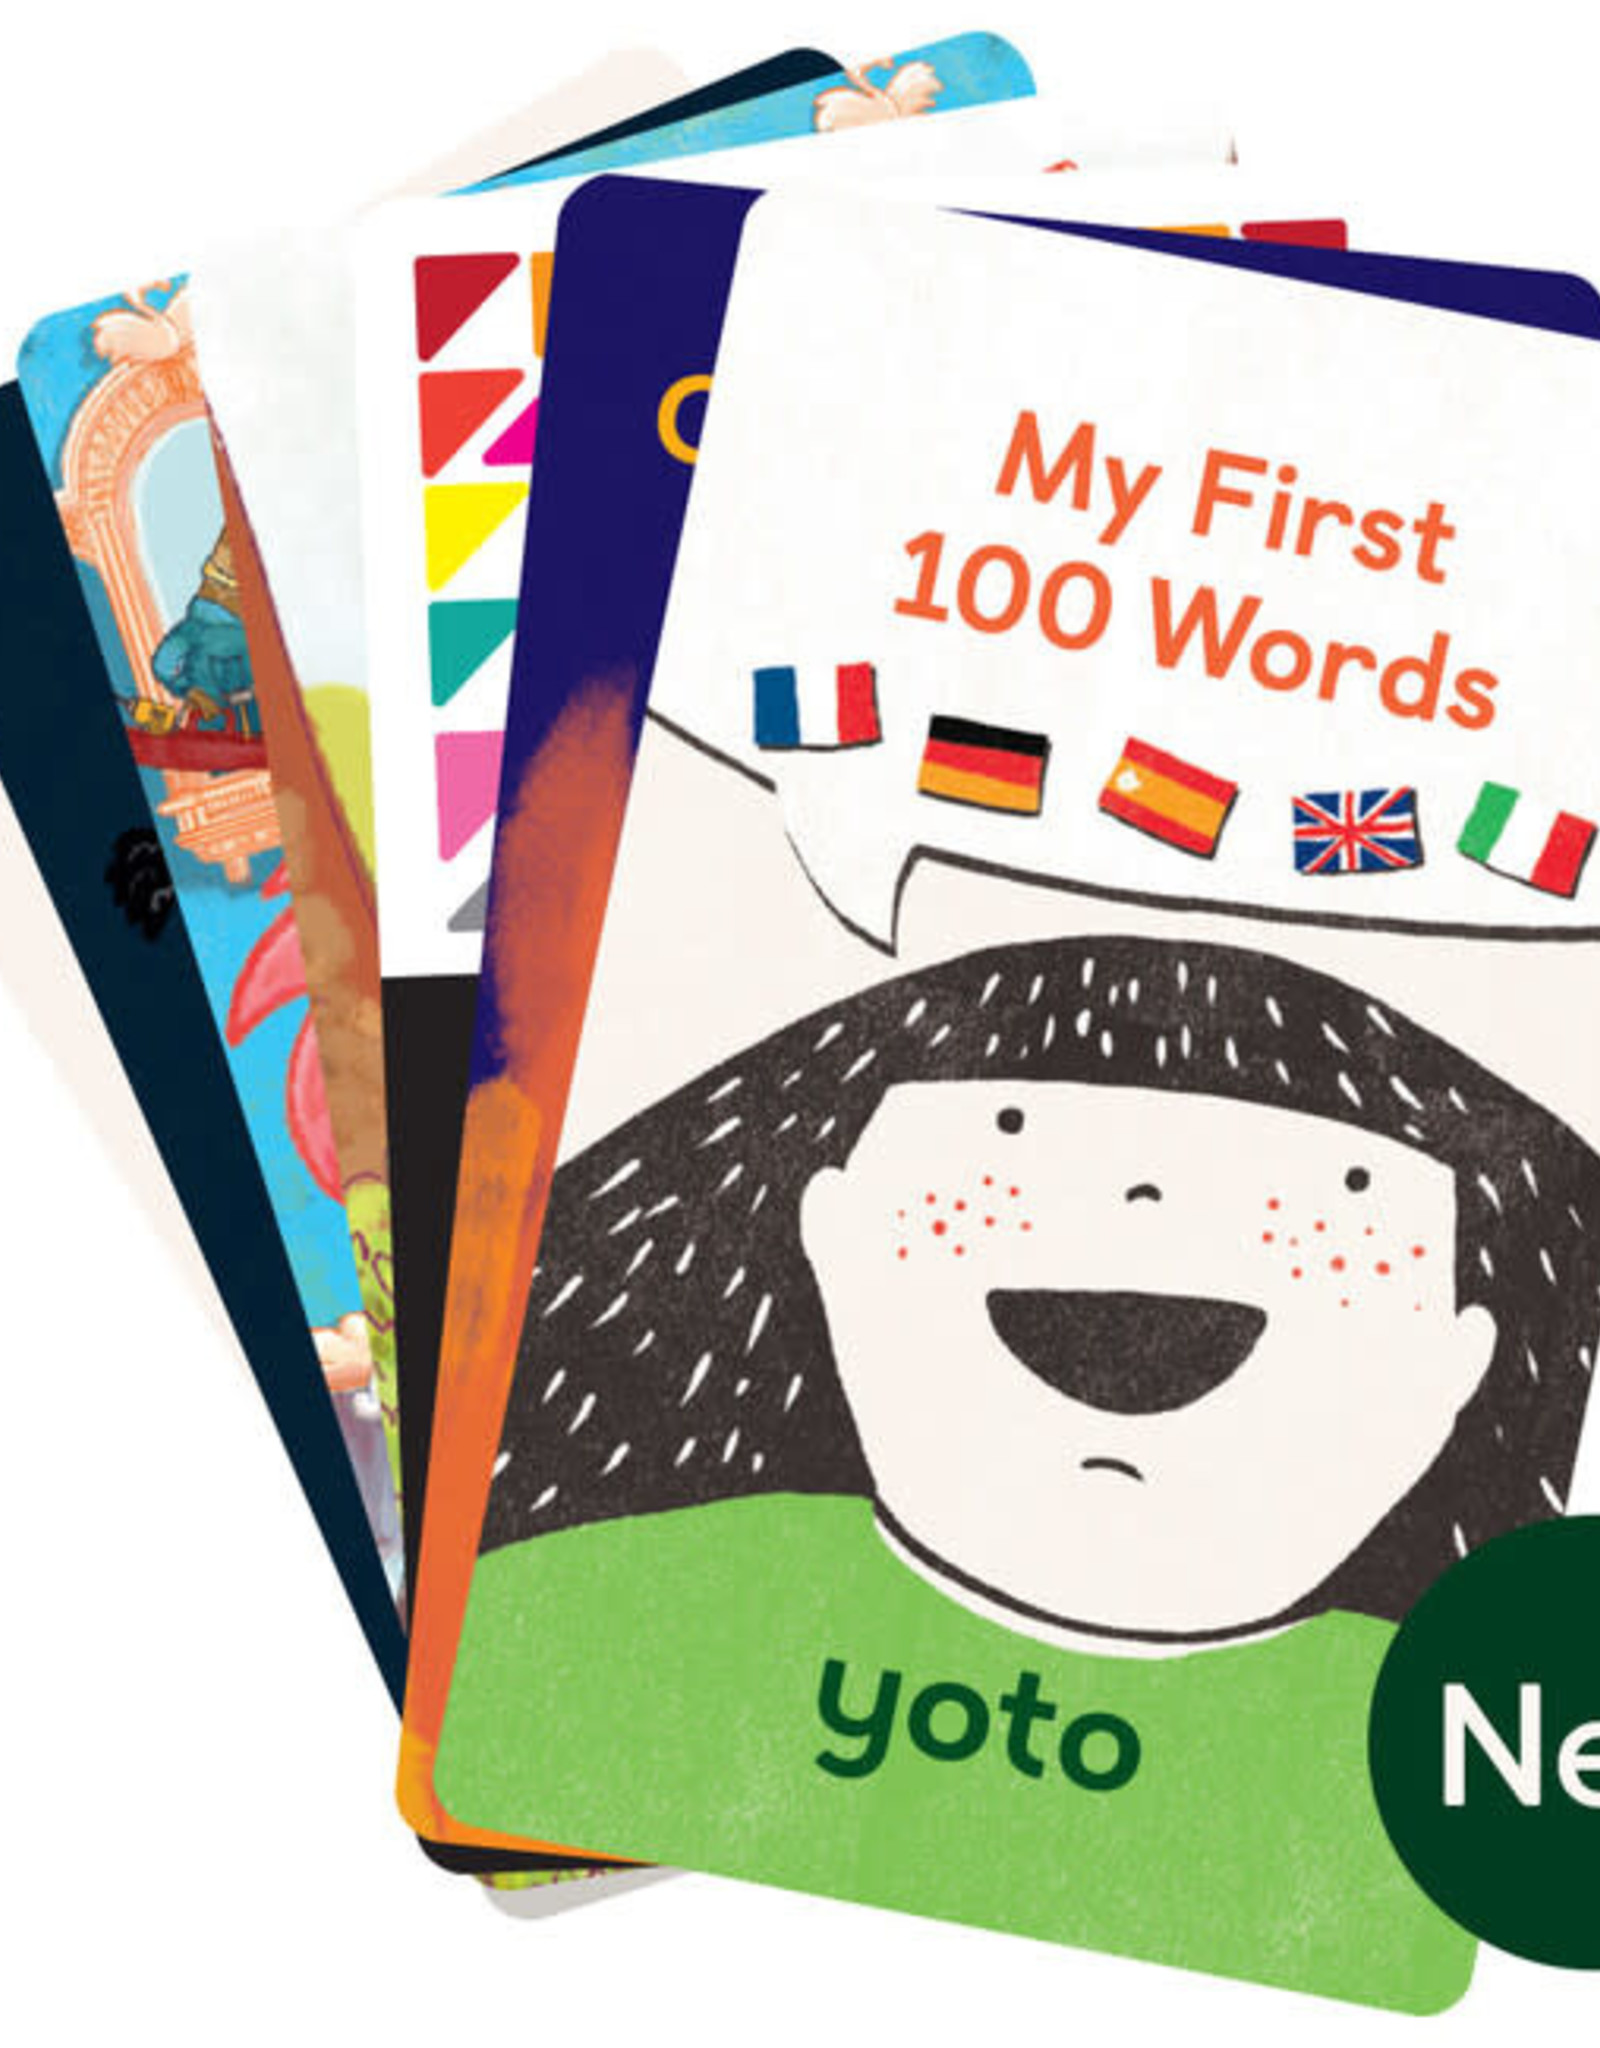 Yoto Card Store - A world of audio for life's greatest adventure